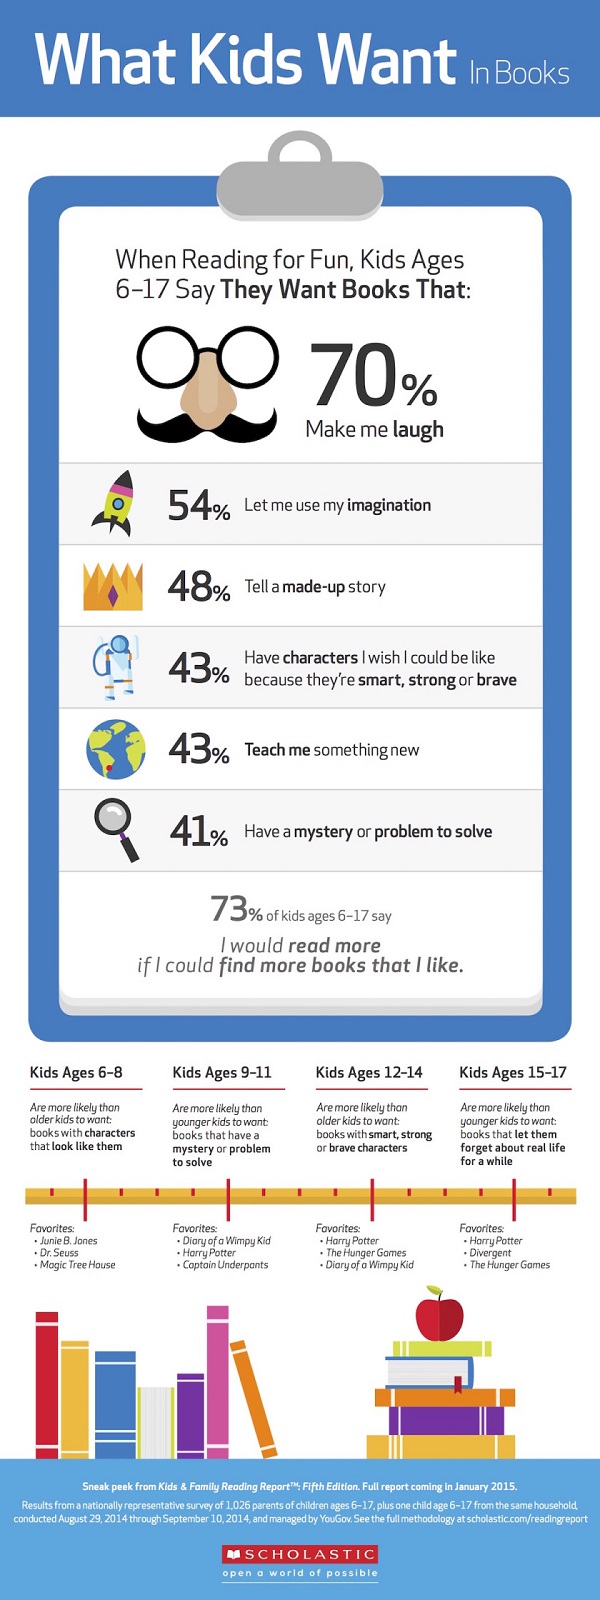 Infografía "What Kids Want in Books"